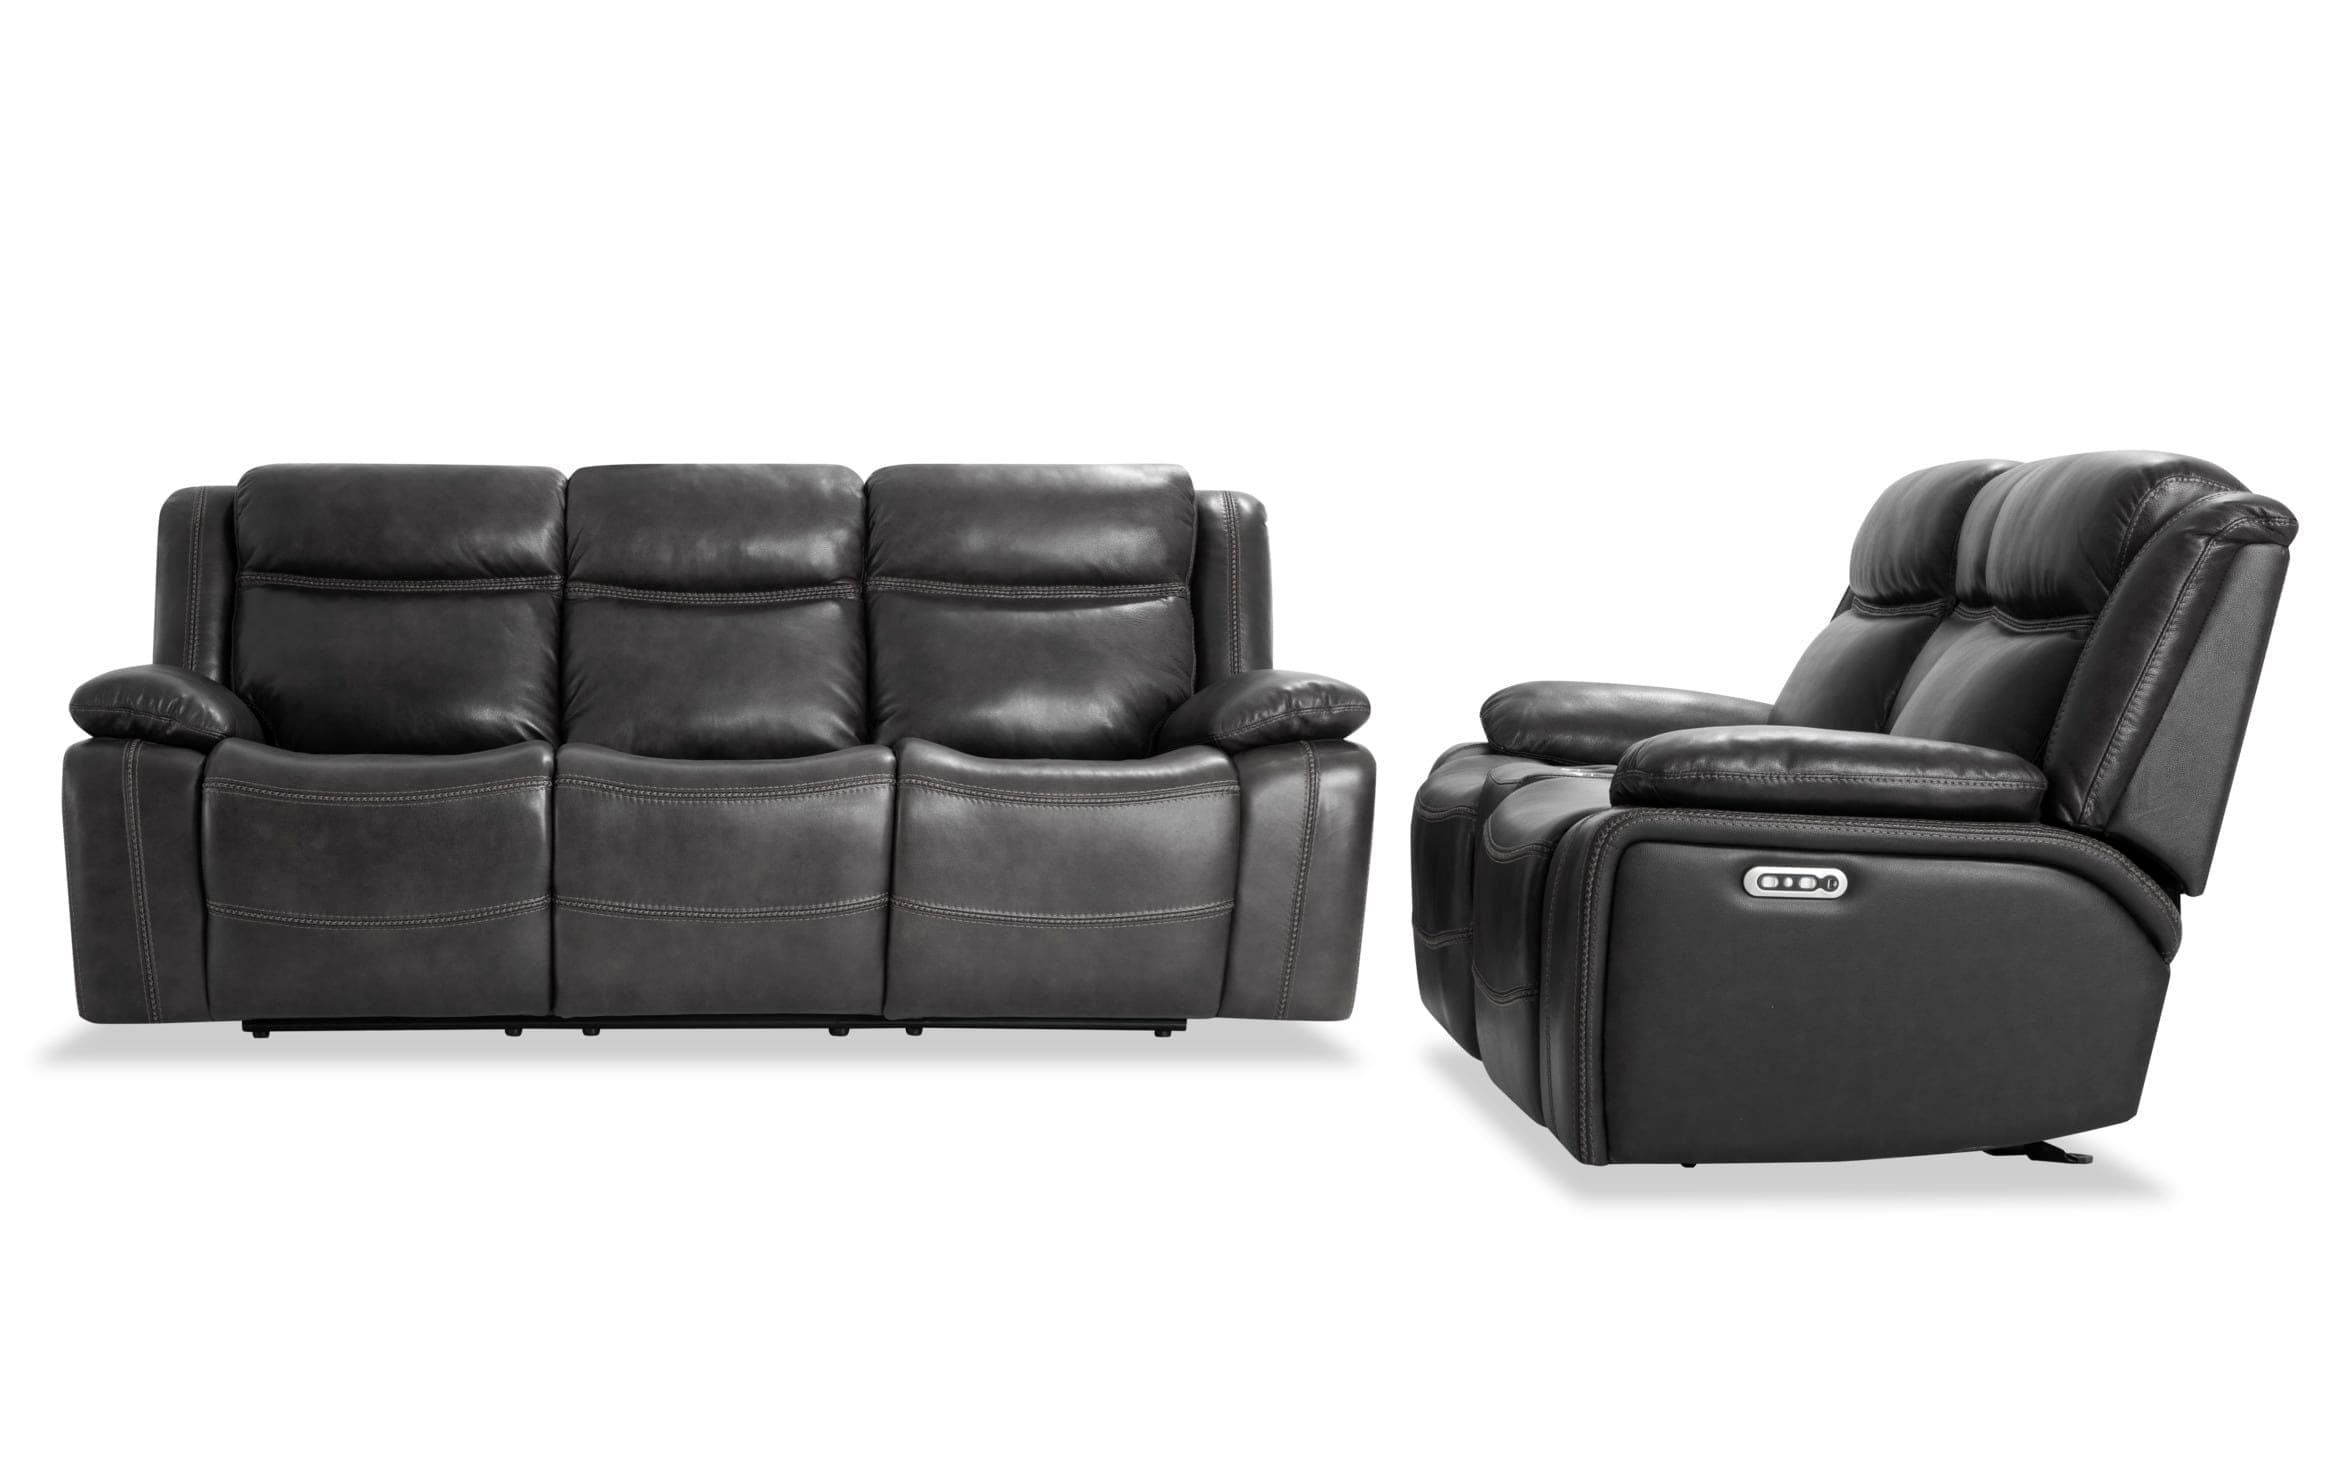 Trailblazer Gray Leather Power, Gray Leather Reclining Sofa And Loveseat